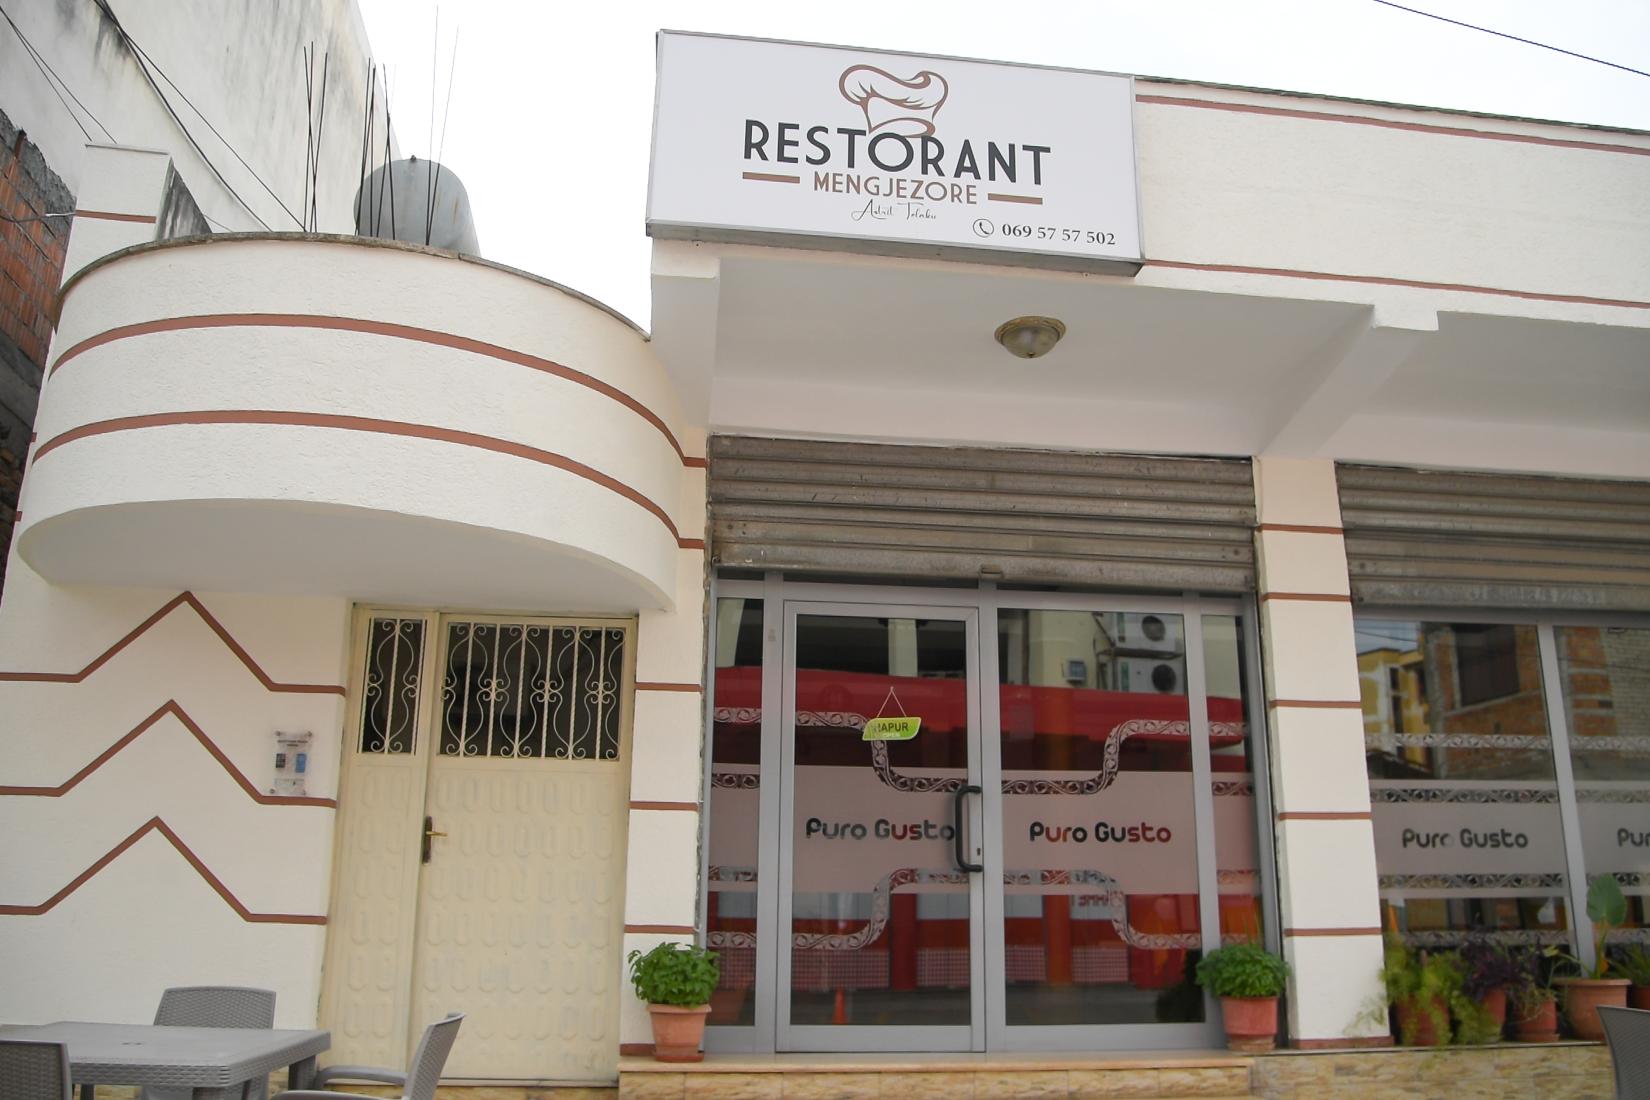 The mall restaurant "Astrit Telaku" now has a new business image.